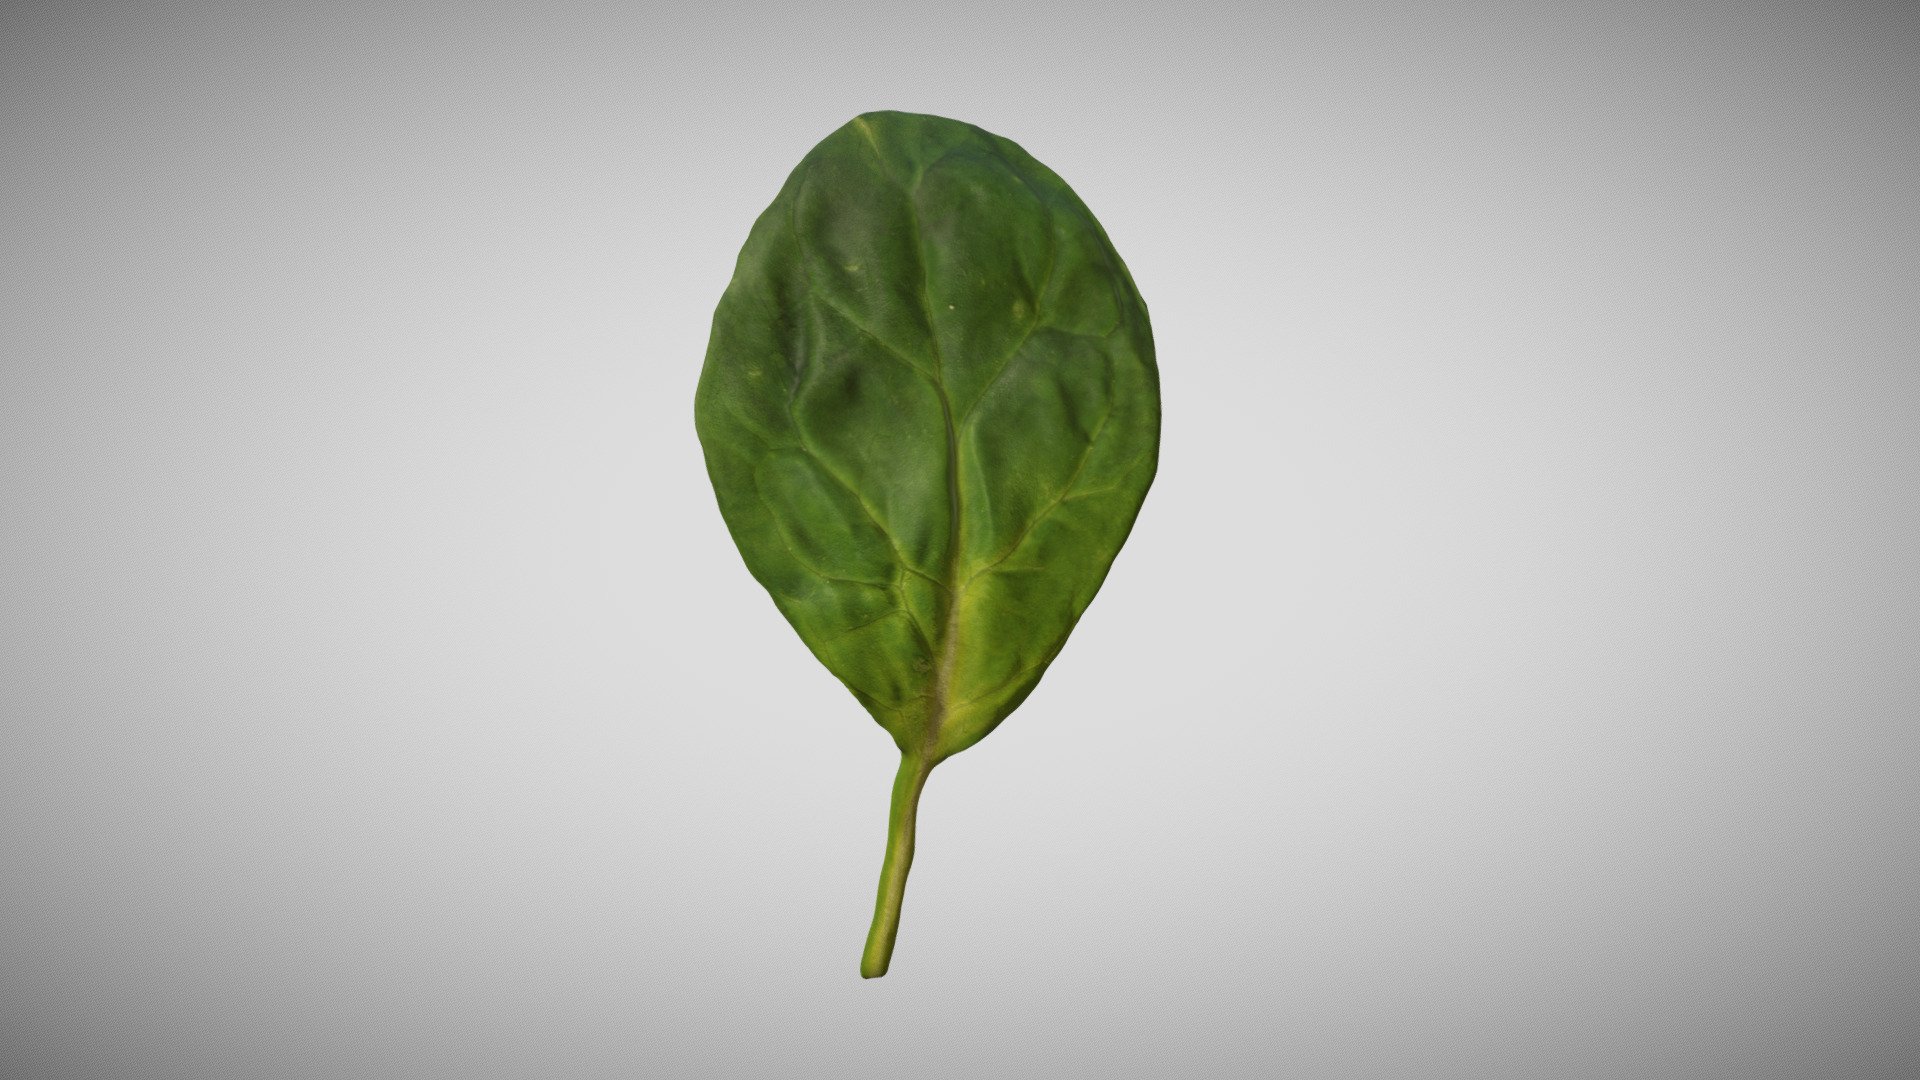 Baby Spinach Leaf 1 3D Scan captured with Canon 5DSR with Macro Lens, using cross-polarization lighting for flat light and elimination of highlights, which captures a more true color and more points for the point cloud, which is then surfaced to a mesh. Package includes low and high poly OBJs (1,241 polys and 19,856 polys), diffuse map (4k), normal map (4k), glossy map (2k), specular map (2k), and mtl files (so you can drag-and-drop to view obj with texture). The models have quad meshes with UVs 3d model